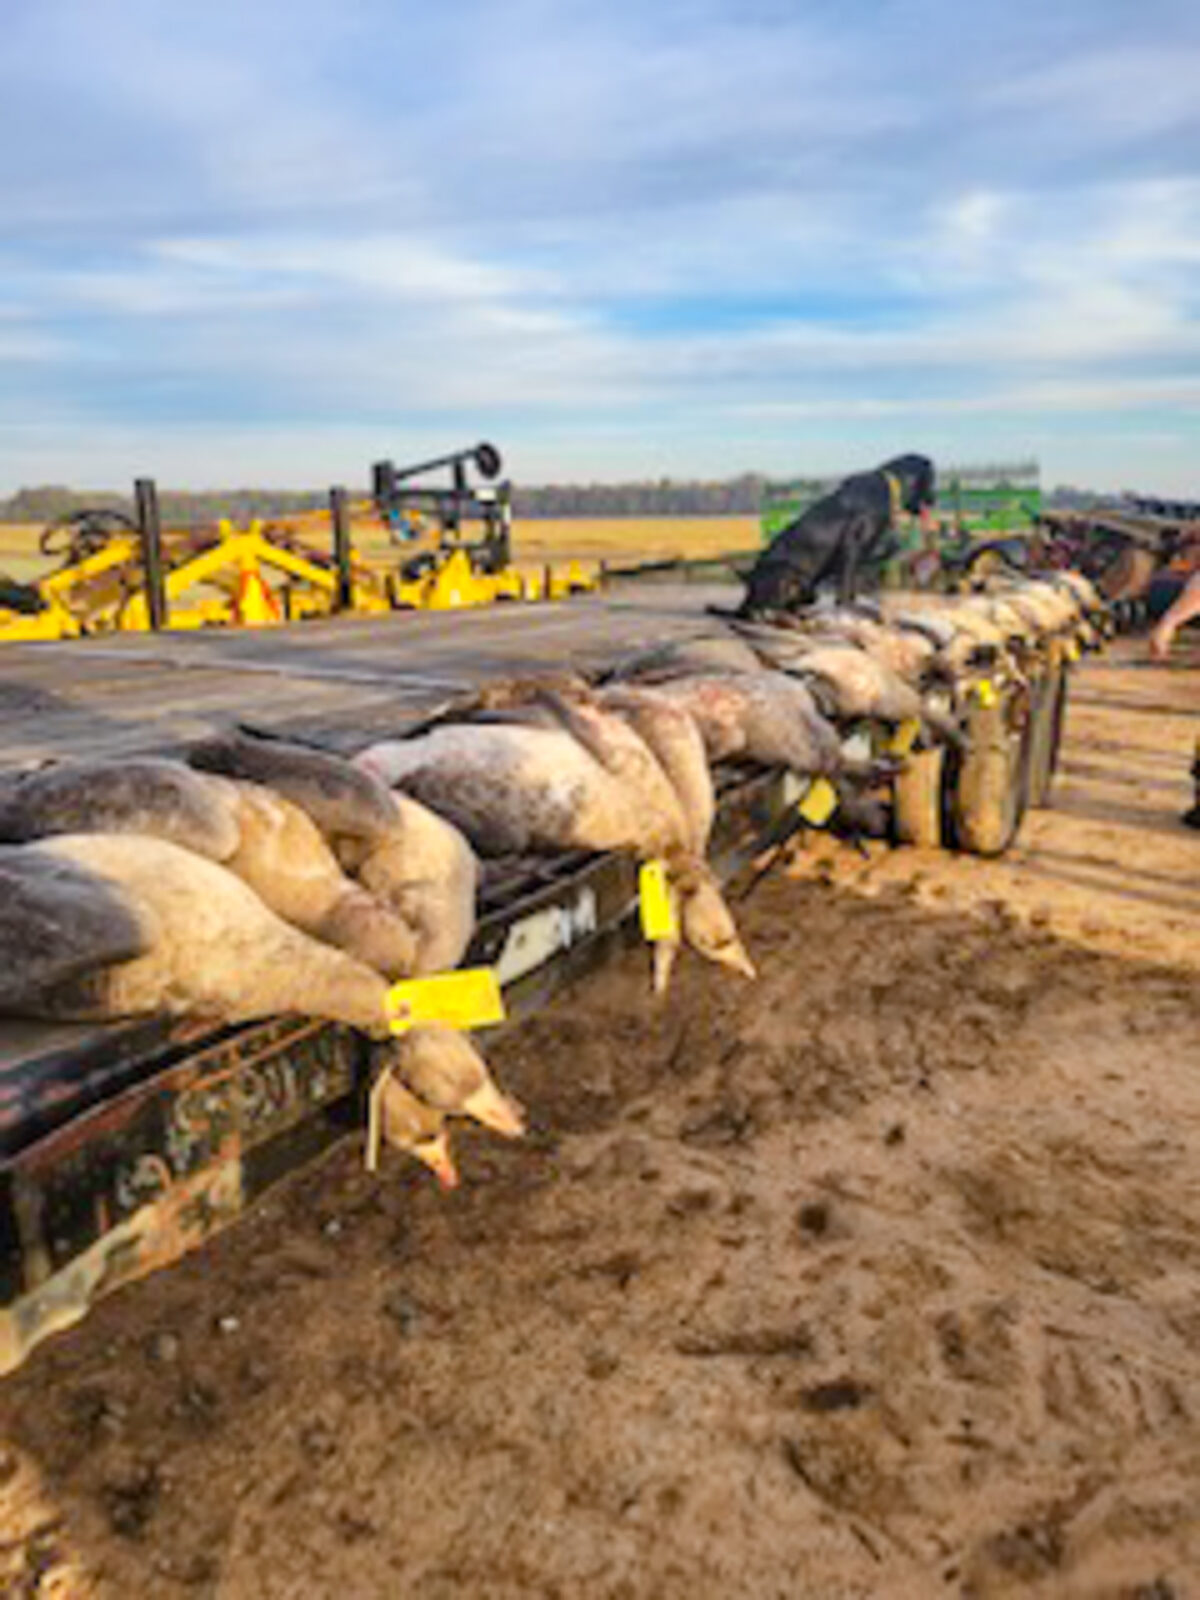 A row of harvested geese on a flatbed trailer with black hunting dog in the middle of a field.